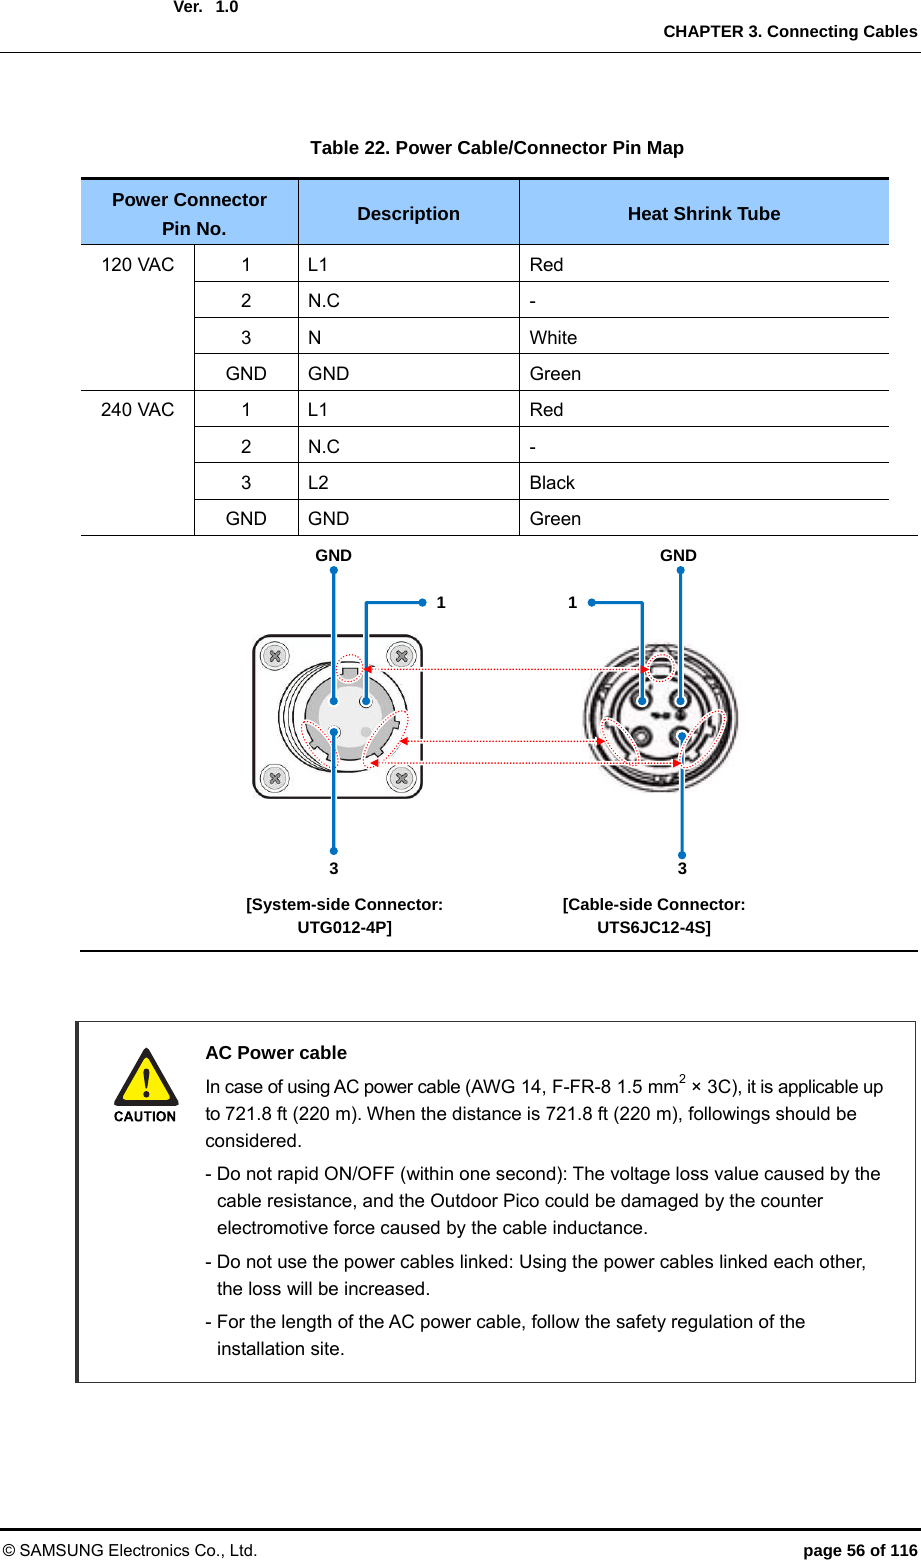  Ver.   CHAPTER 3. Connecting Cables © SAMSUNG Electronics Co., Ltd.  page 56 of 116 1.0 Table 22. Power Cable/Connector Pin Map Power Connector  Pin No.  Description  Heat Shrink Tube 120 VAC  1  L1  Red 2 N.C  - 3 N  White GND GND  Green 240 VAC  1  L1  Red 2 N.C  - 3 L2  Black GND GND  Green                  AC Power cable   In case of using AC power cable (AWG 14, F-FR-8 1.5 mm2 × 3C), it is applicable up to 721.8 ft (220 m). When the distance is 721.8 ft (220 m), followings should be considered.   - Do not rapid ON/OFF (within one second): The voltage loss value caused by the   cable resistance, and the Outdoor Pico could be damaged by the counter   electromotive force caused by the cable inductance.   - Do not use the power cables linked: Using the power cables linked each other,   the loss will be increased.   - For the length of the AC power cable, follow the safety regulation of the  installation site. 1GND GND3  31[Cable-side Connector: UTS6JC12-4S] [System-side Connector:   UTG012-4P] 